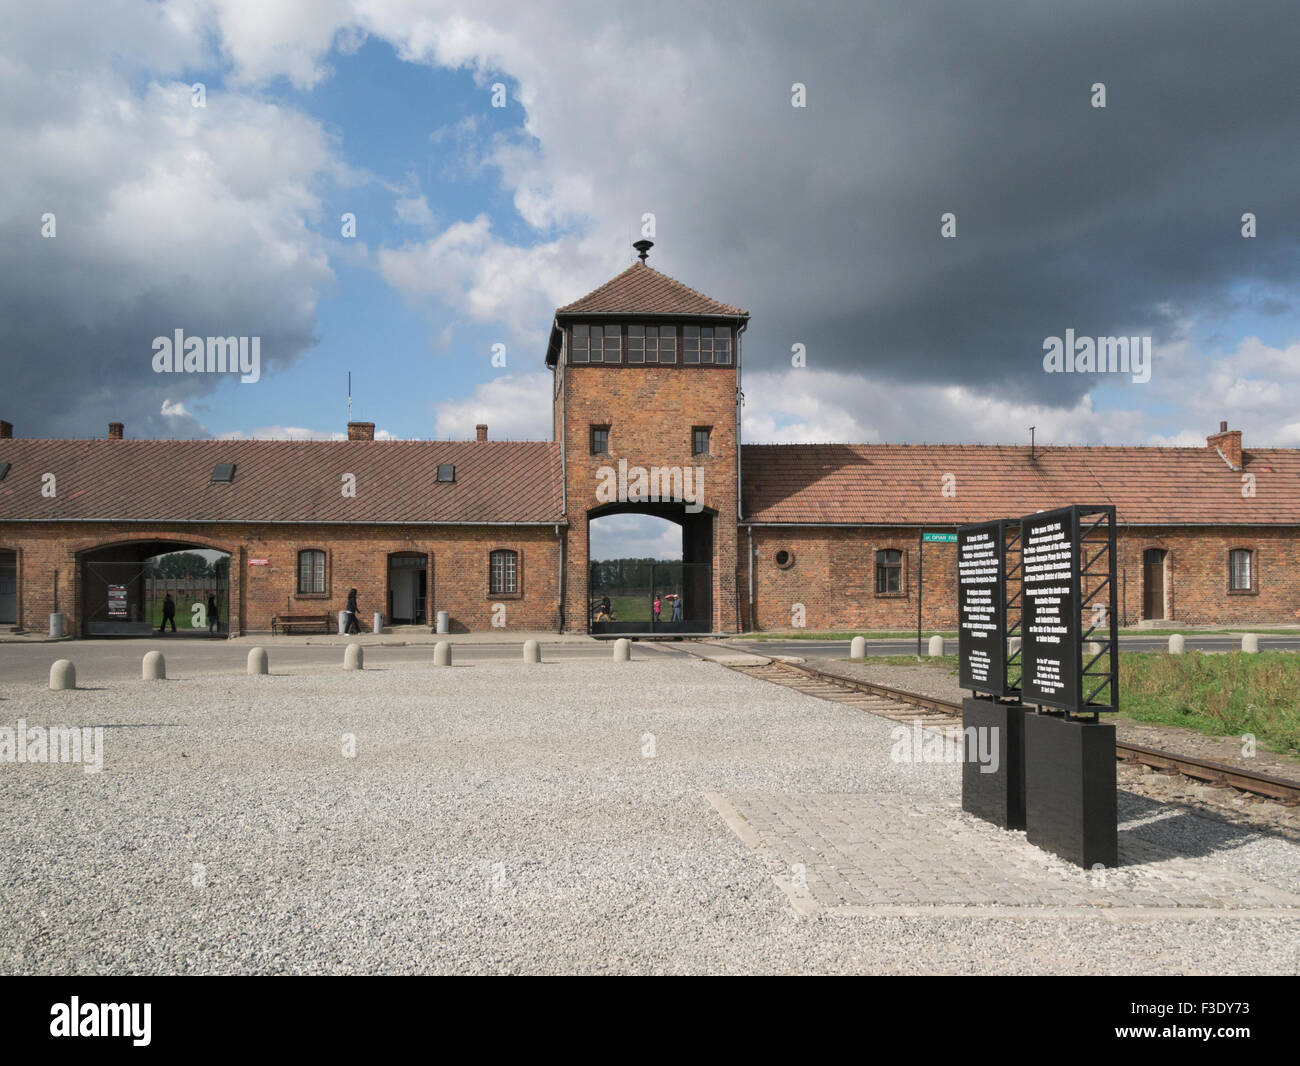 Entrance to former Auschwitz-Birkenau Concentration Camp memorial and museum Oświęcim Poland where thousands of Jews were murdered by German Nazis Stock Photo